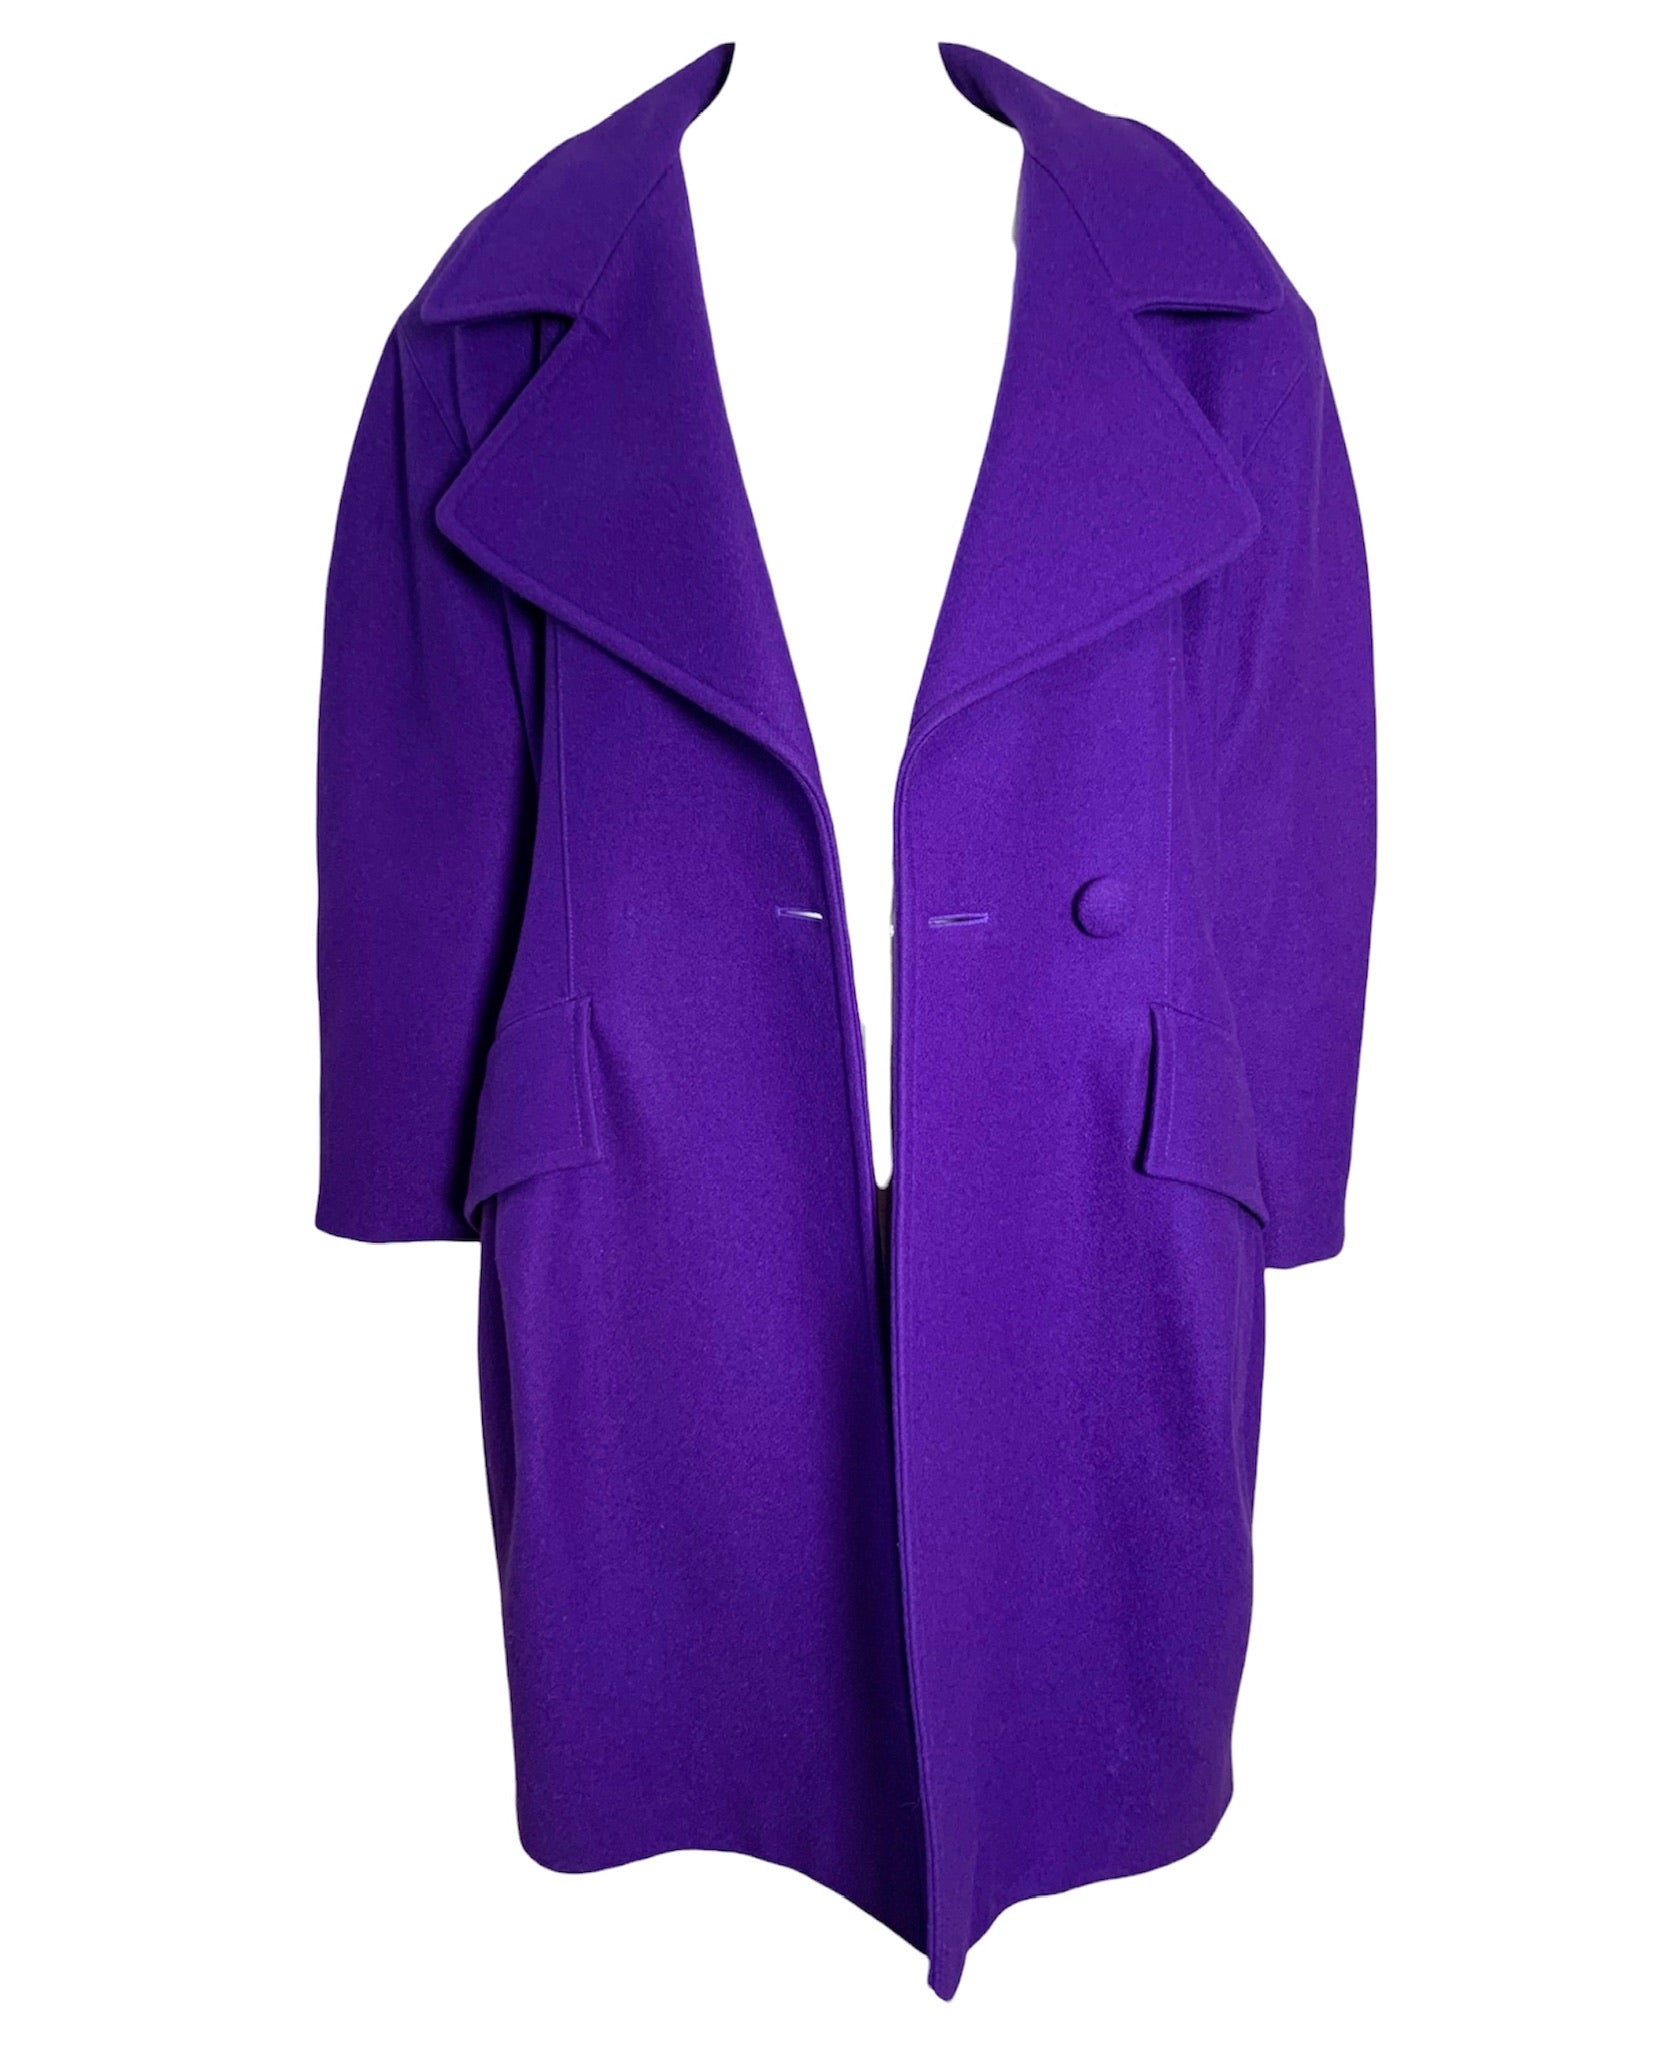 Christian Lacroix 90s Exaggerated Silhouette Purple Wool Coat FRONT CLOSED 2 of 5